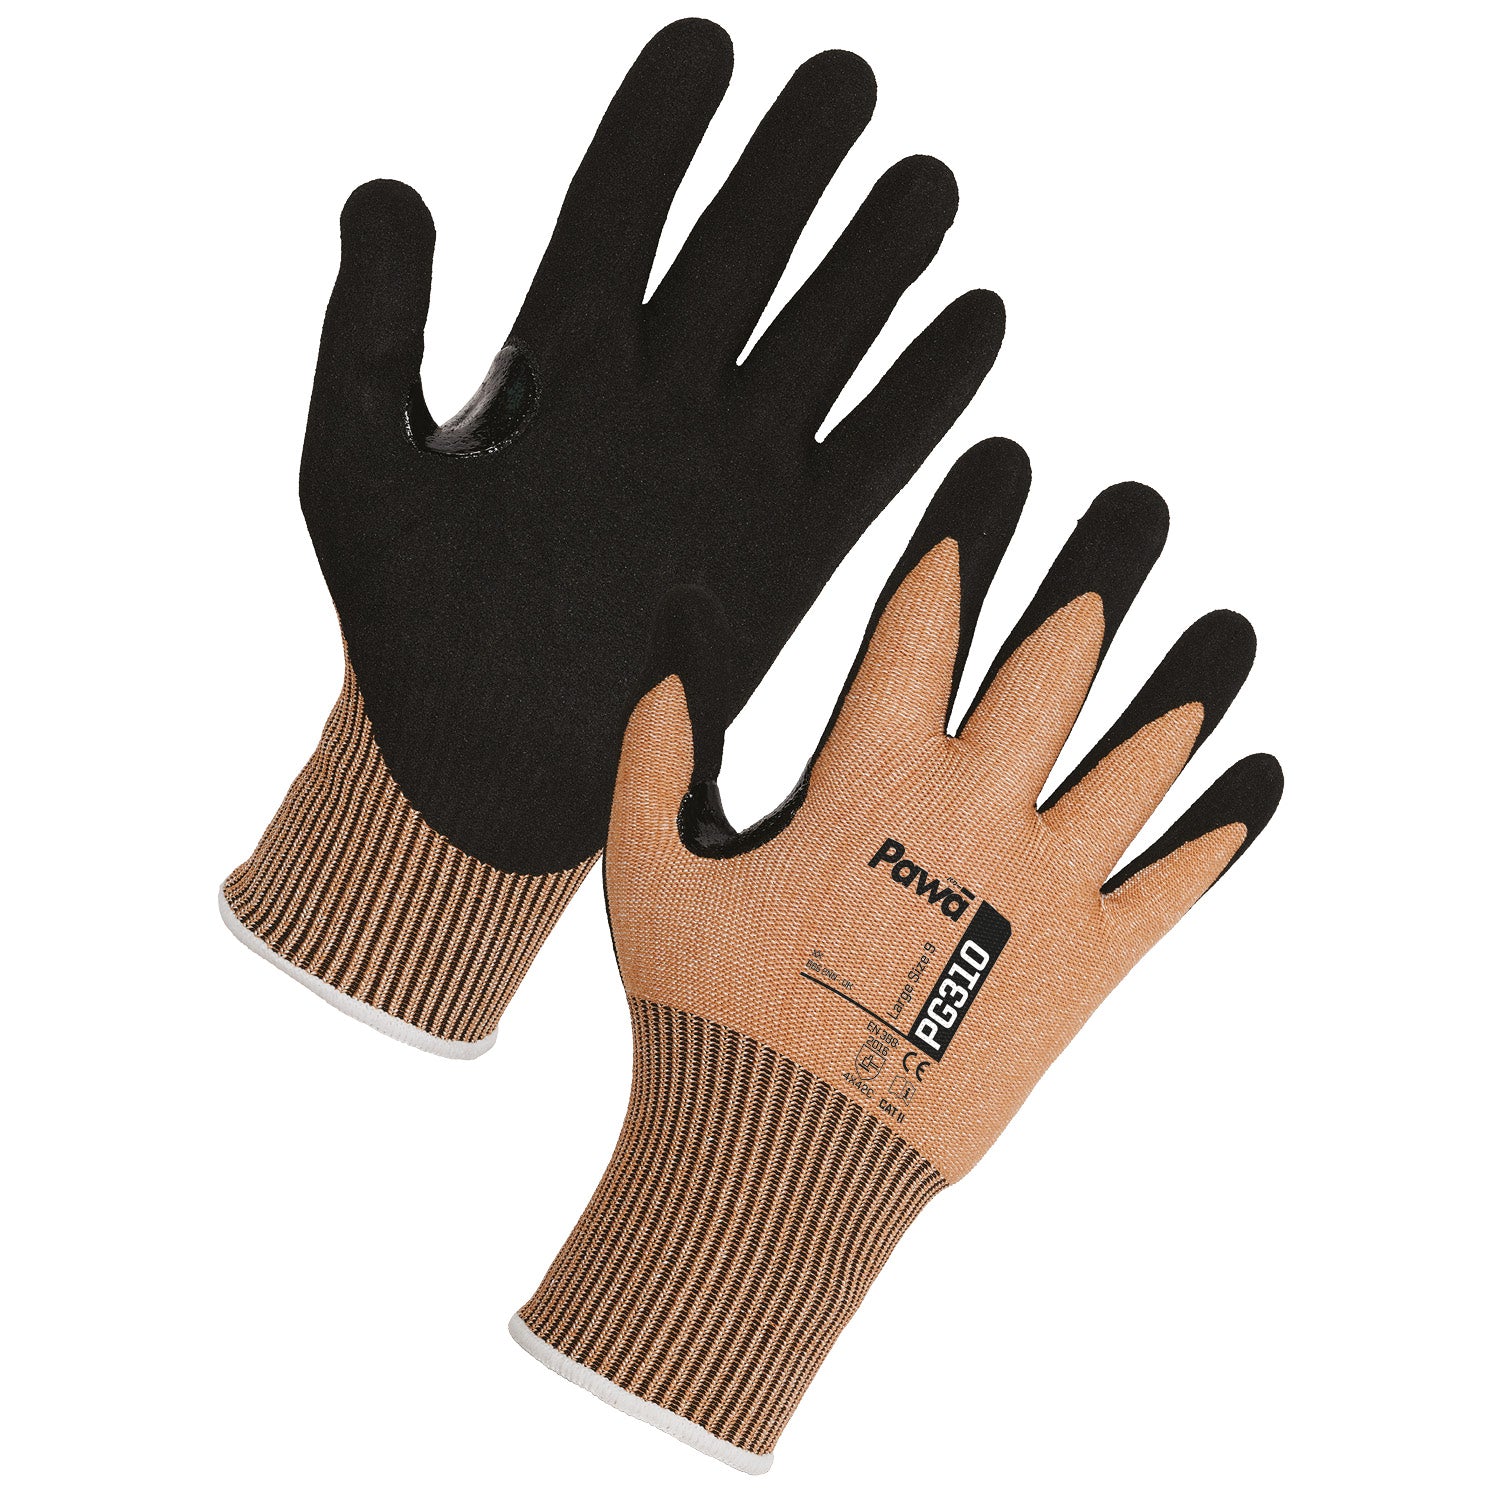 Supertouch Pawa PG310 Cut-Resistant Gloves